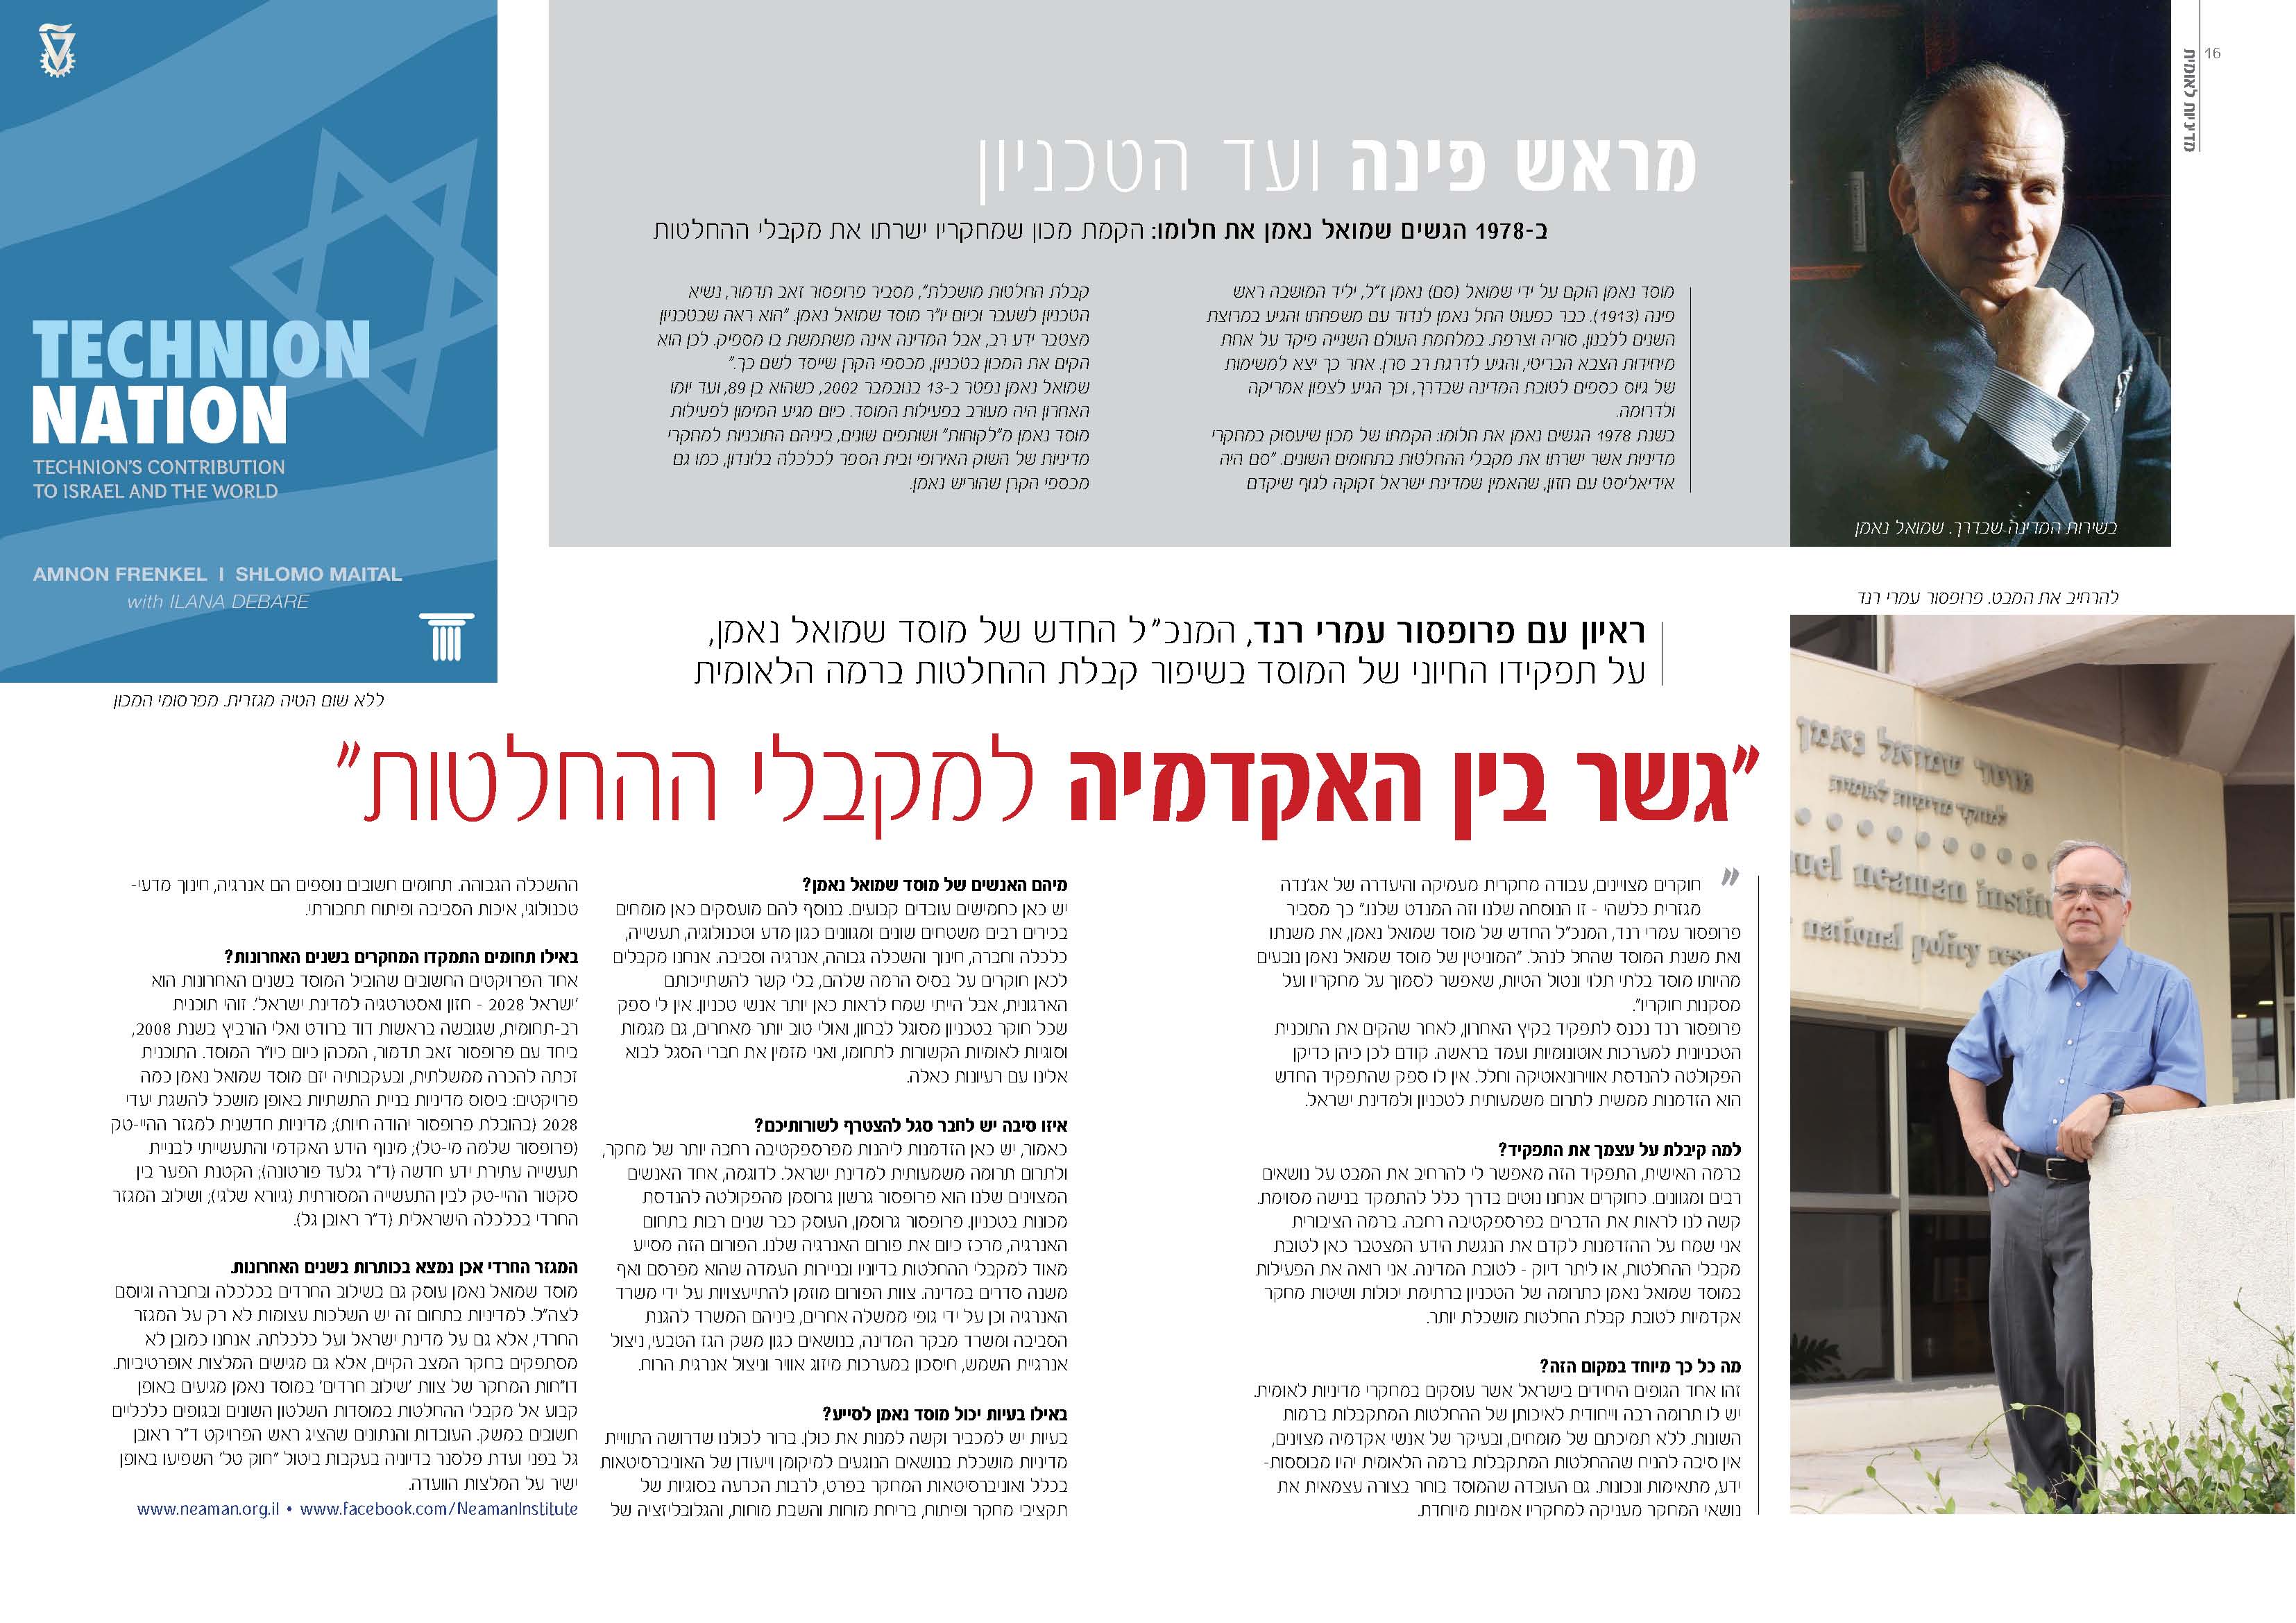 Interview with Prof. Rand, the new CEO of SNI, on the vital role of the institution in improving decision-making at the national level, The Technion Magazine